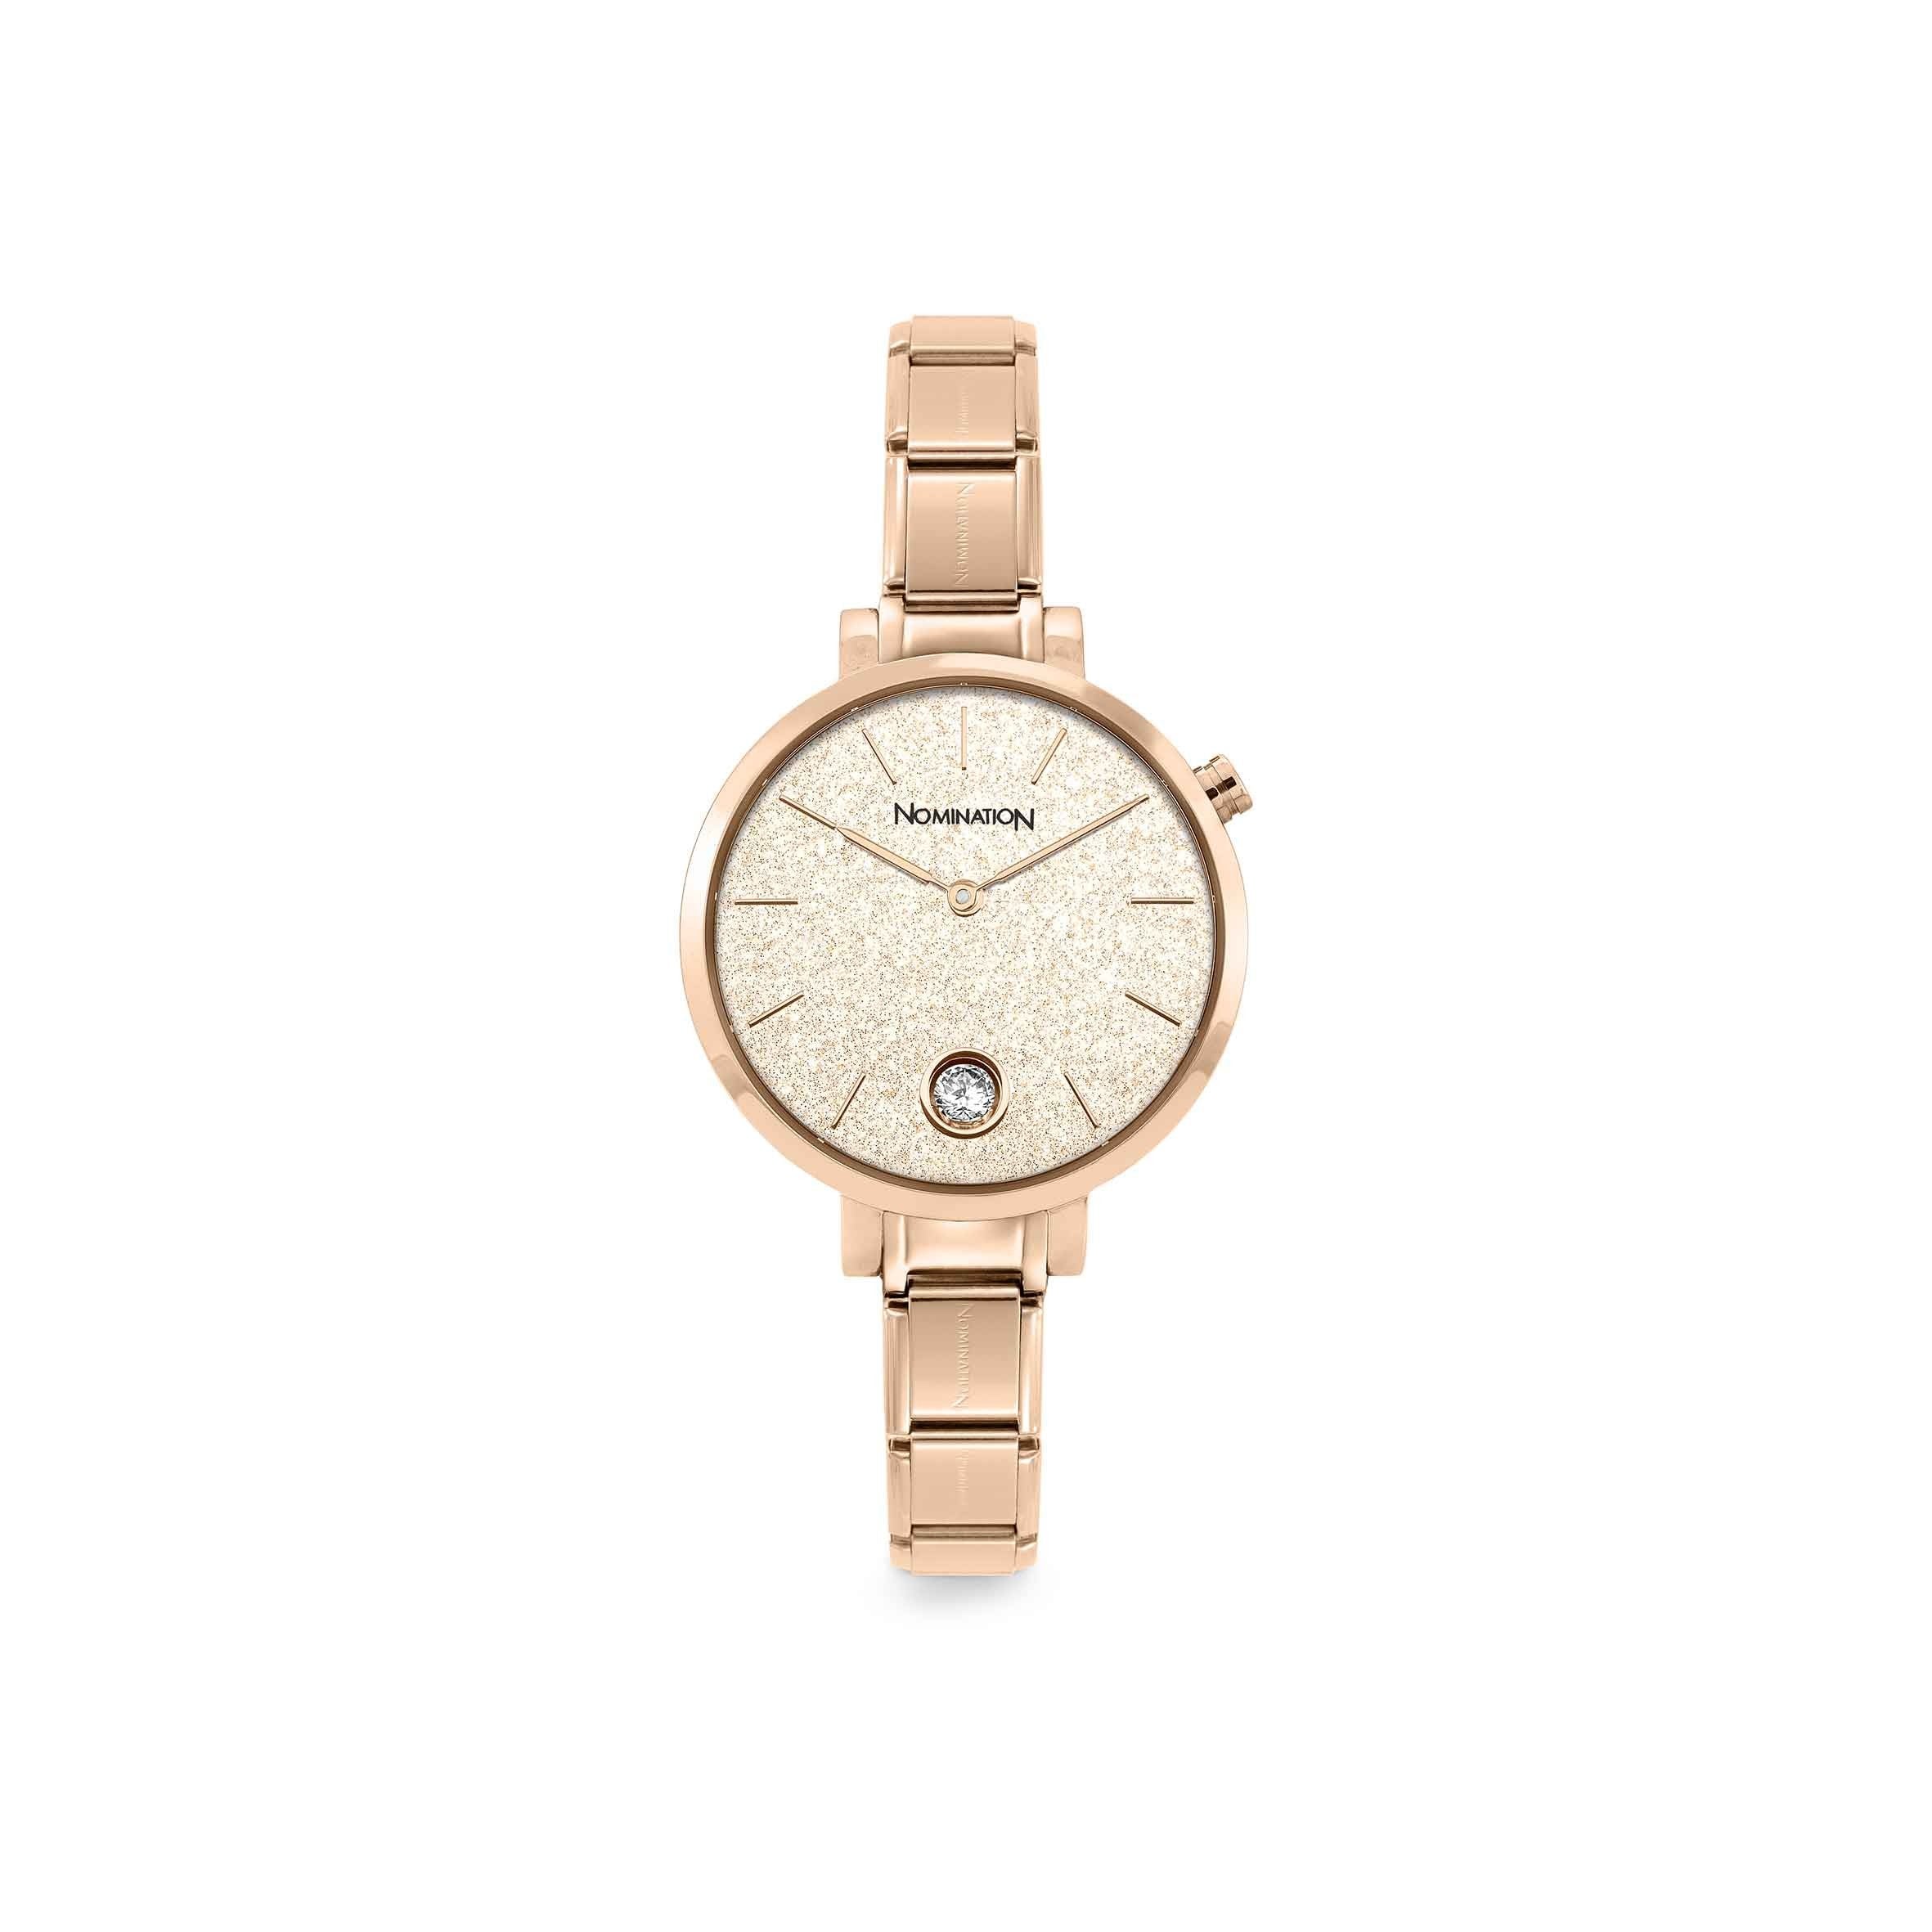 Nomination Paris Rose Gold PVD Watch with Pink Glitter